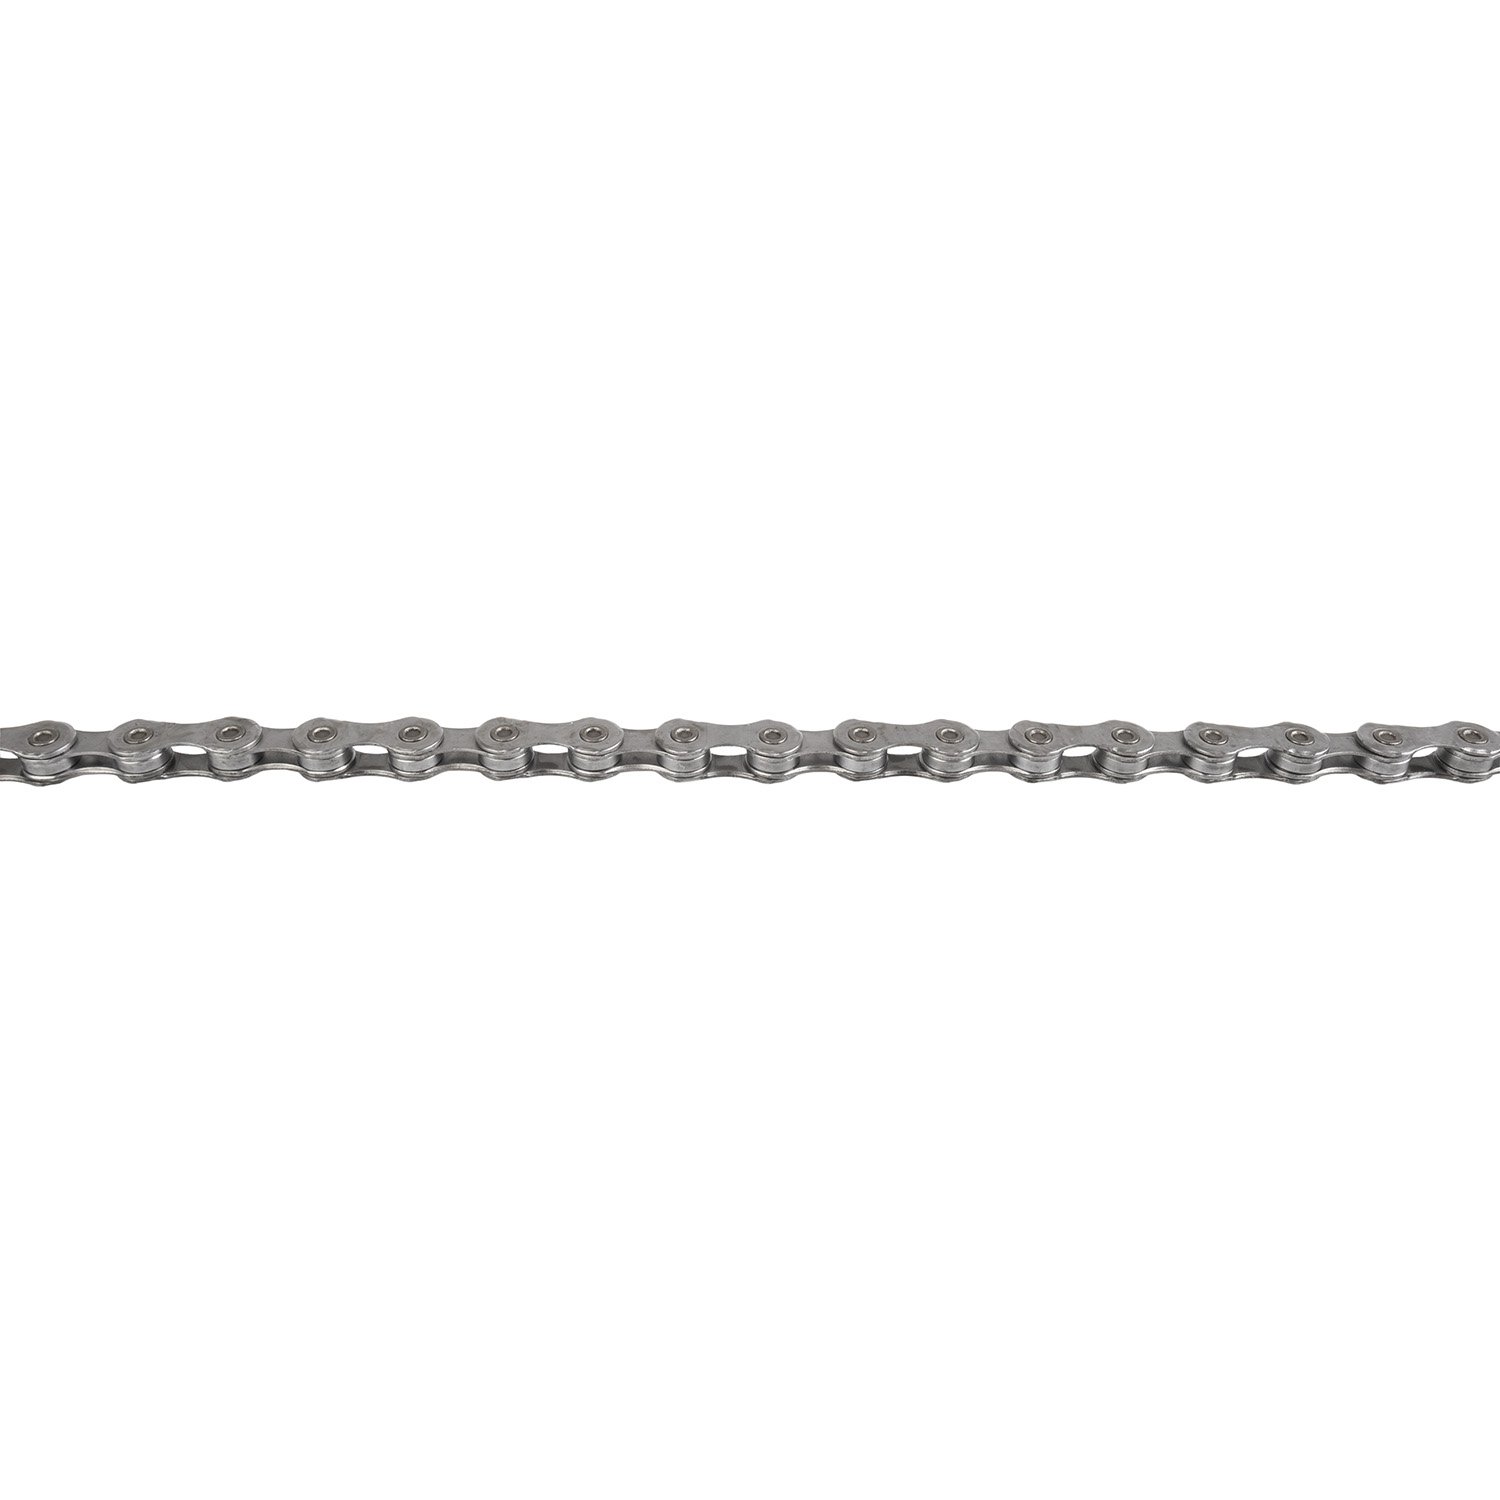 301910 M-WAVE Tenspeed AR derailleur chain – AVAILABLE IN SELECTED BIKE SHOPS